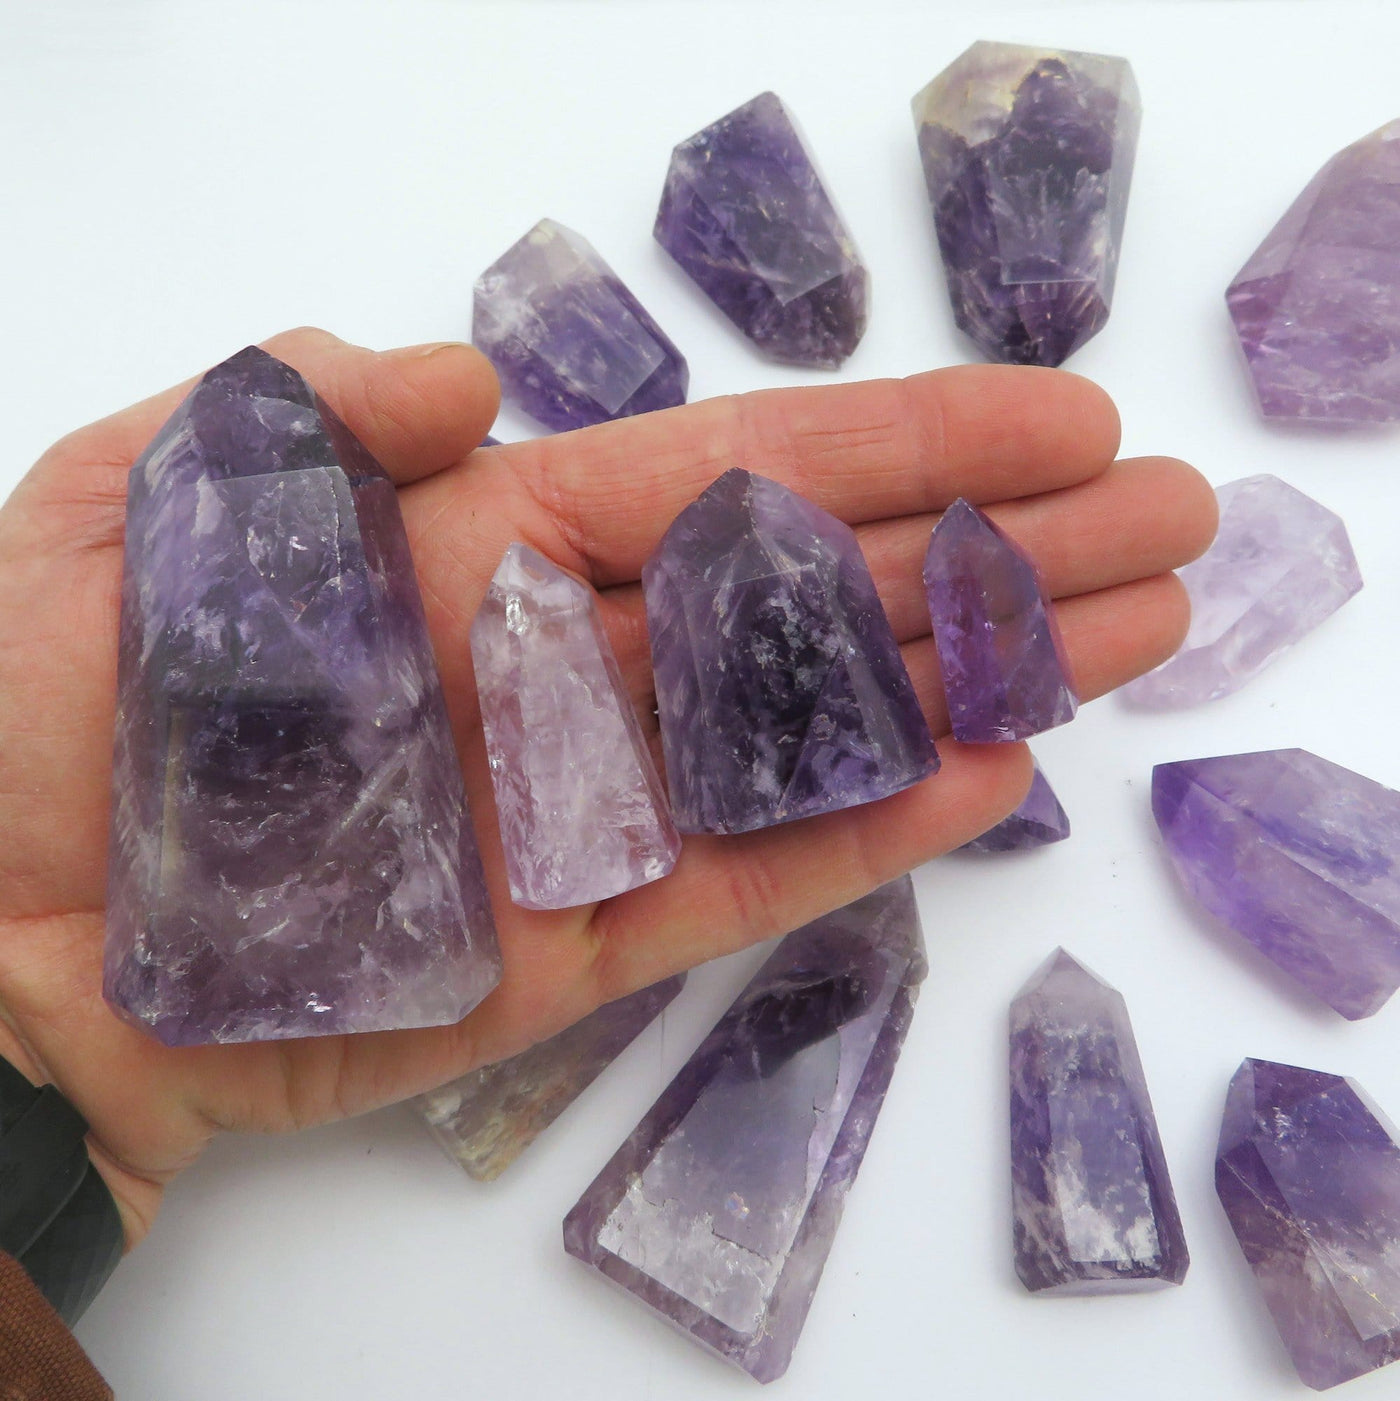 amethyst towers displayed in hand for size reference in each weight category under 40 grams 41-80 grams 81-100 grams 101-150 grams 151-200 grams